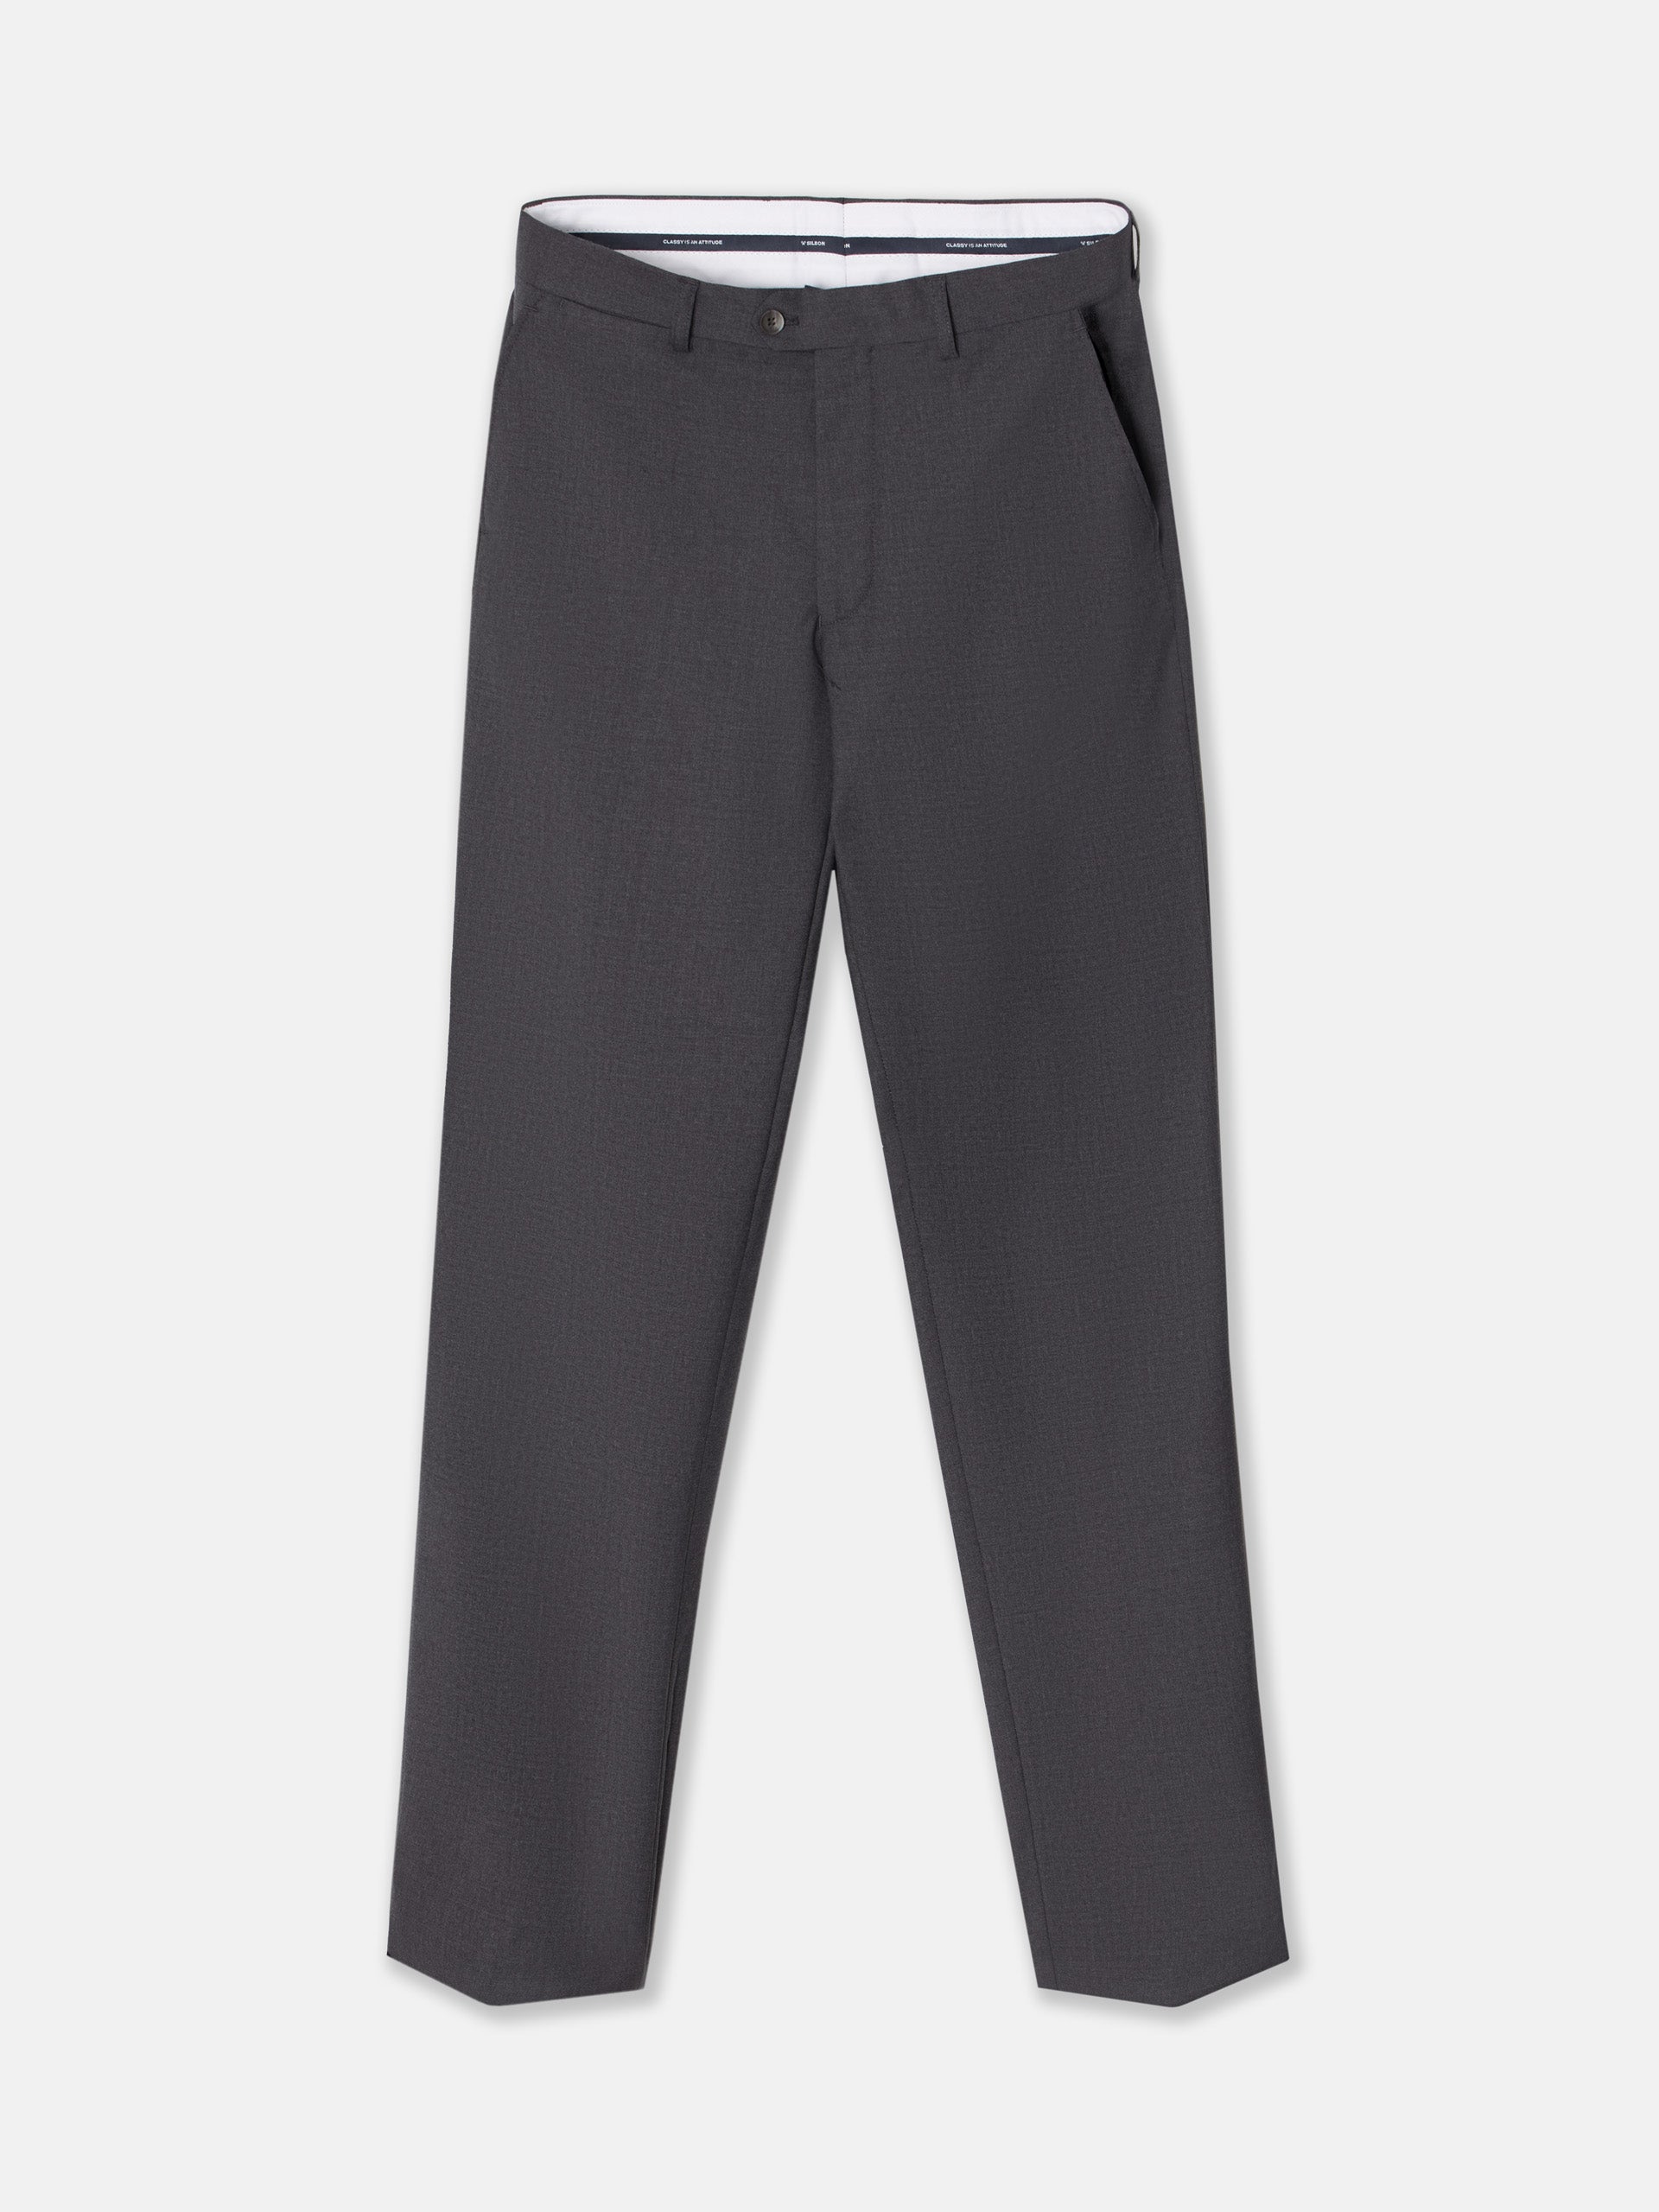 Gray stretch double-breasted suit pants